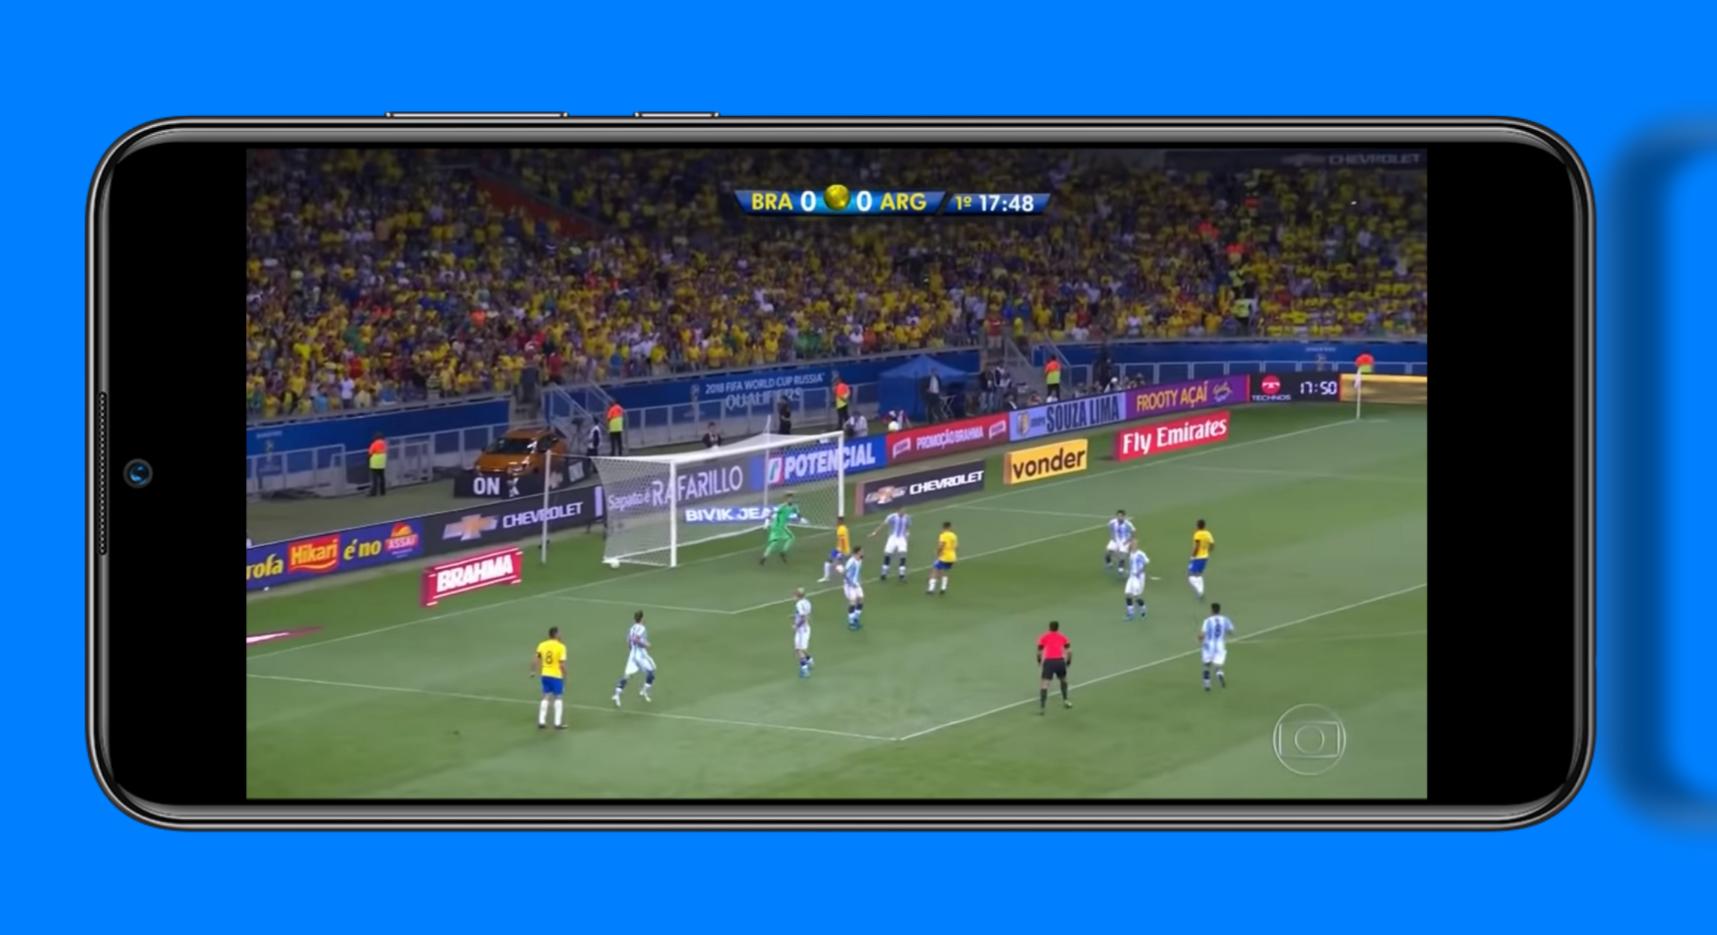 HesGoal - Football News With Free Football Live TV for Android - APK